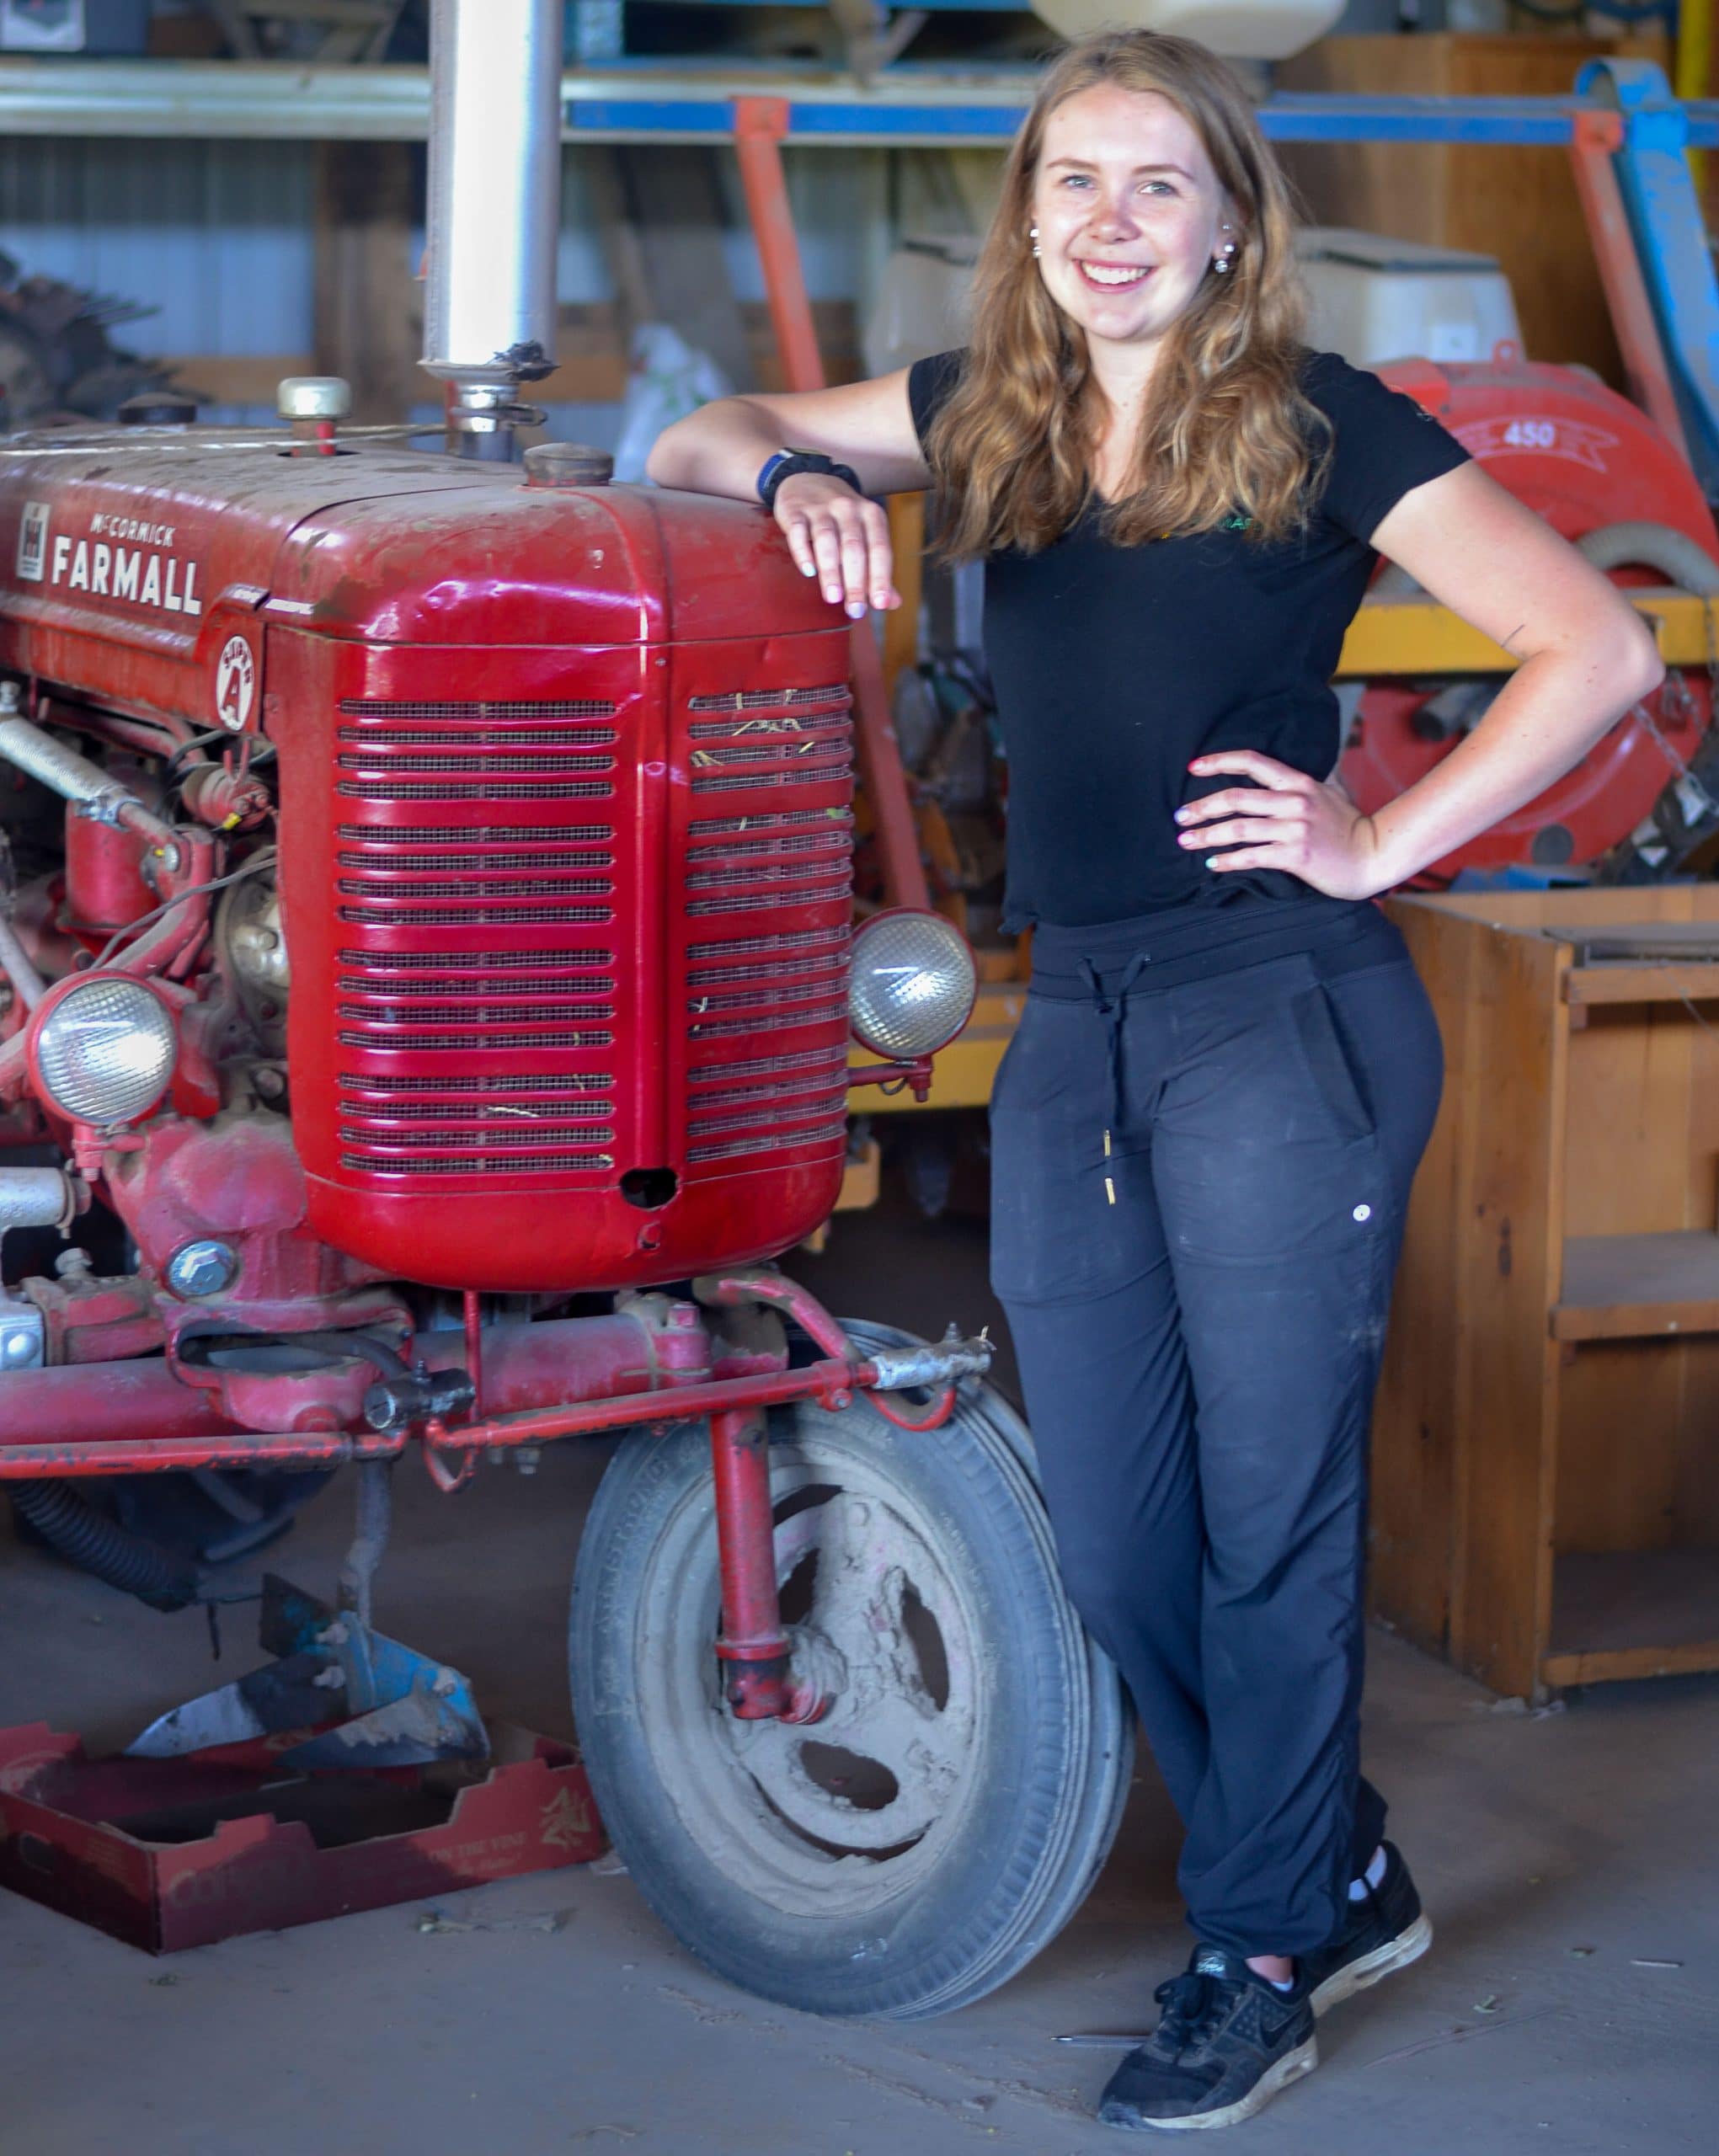 Kaylee Pillon with a Tractor